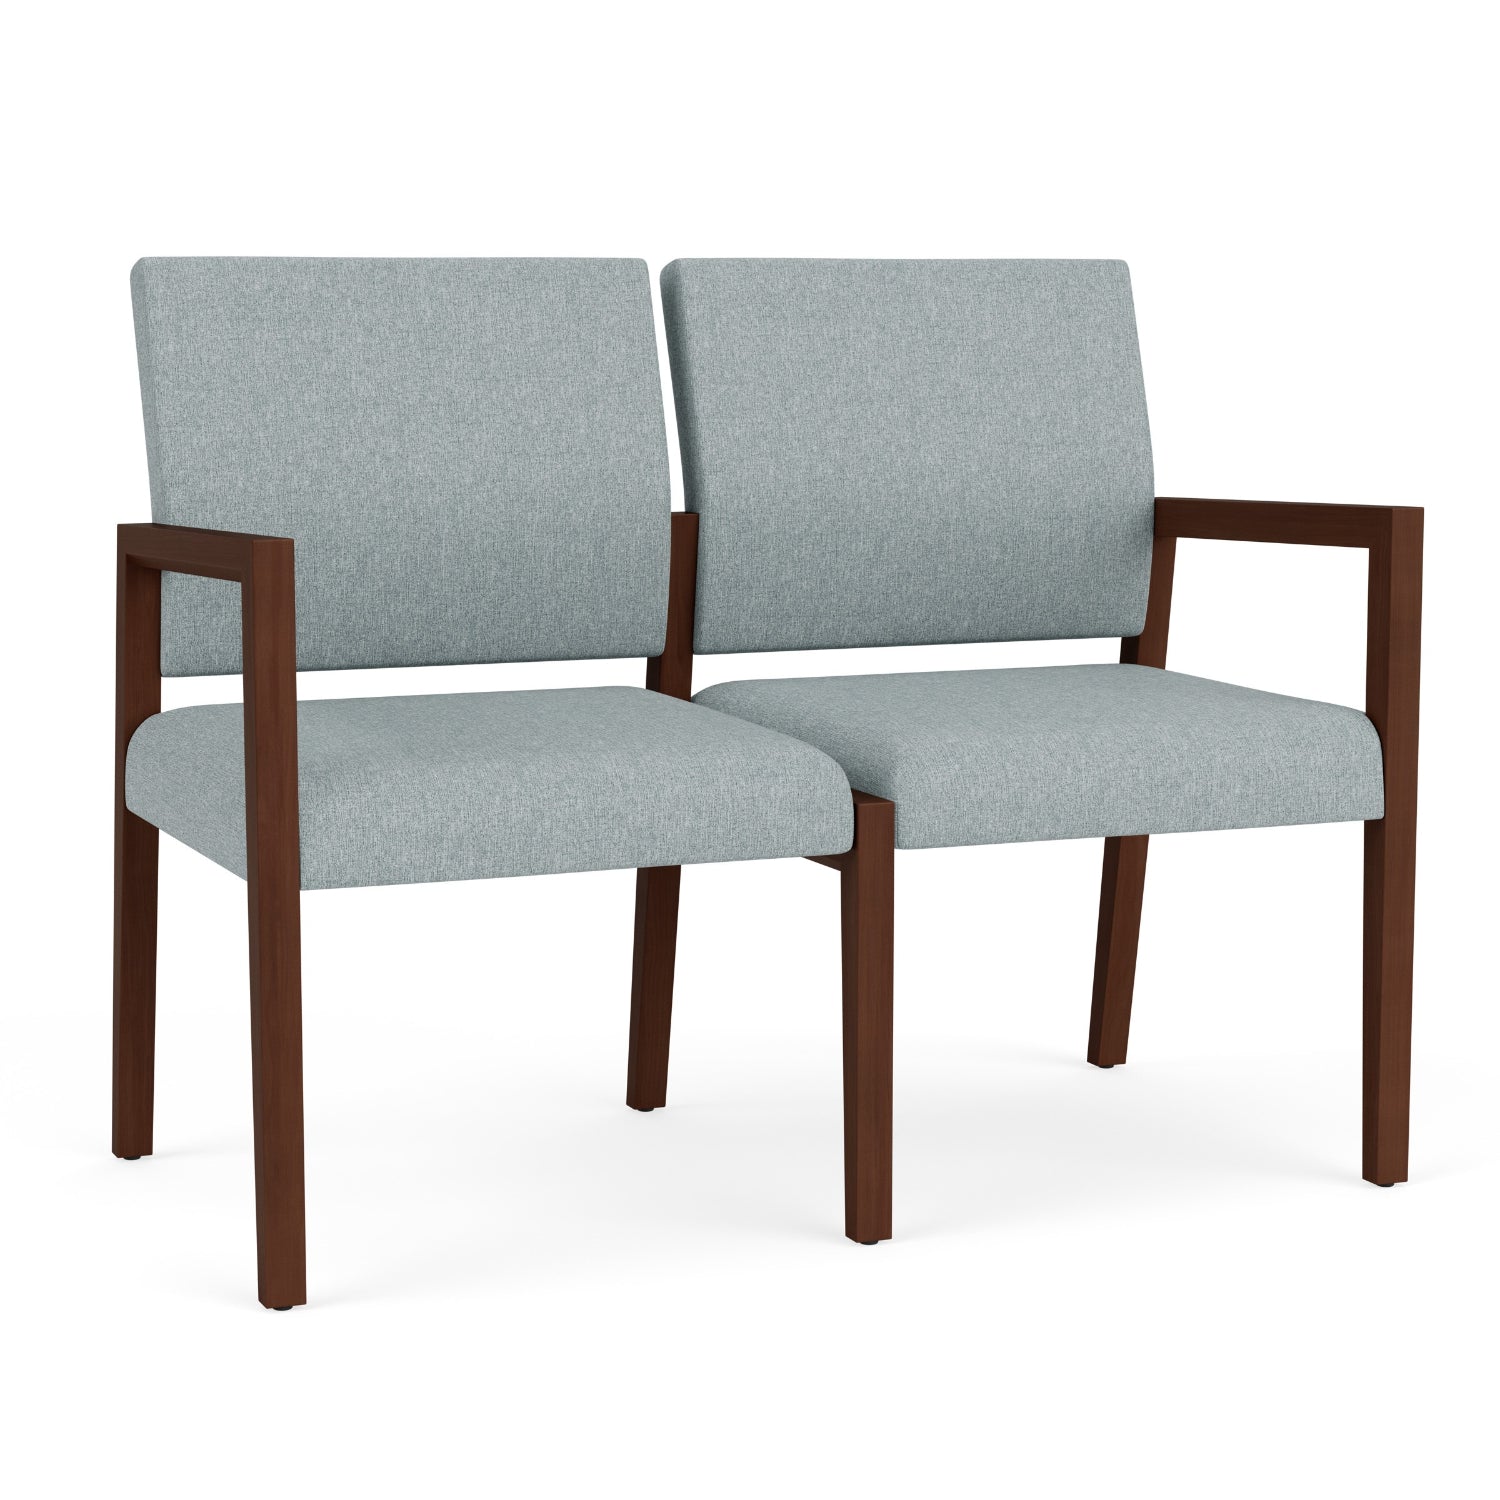 Brooklyn Collection Reception Seating, 2 Seat Sofa, Healthcare Vinyl Upholstery, FREE SHIPPING